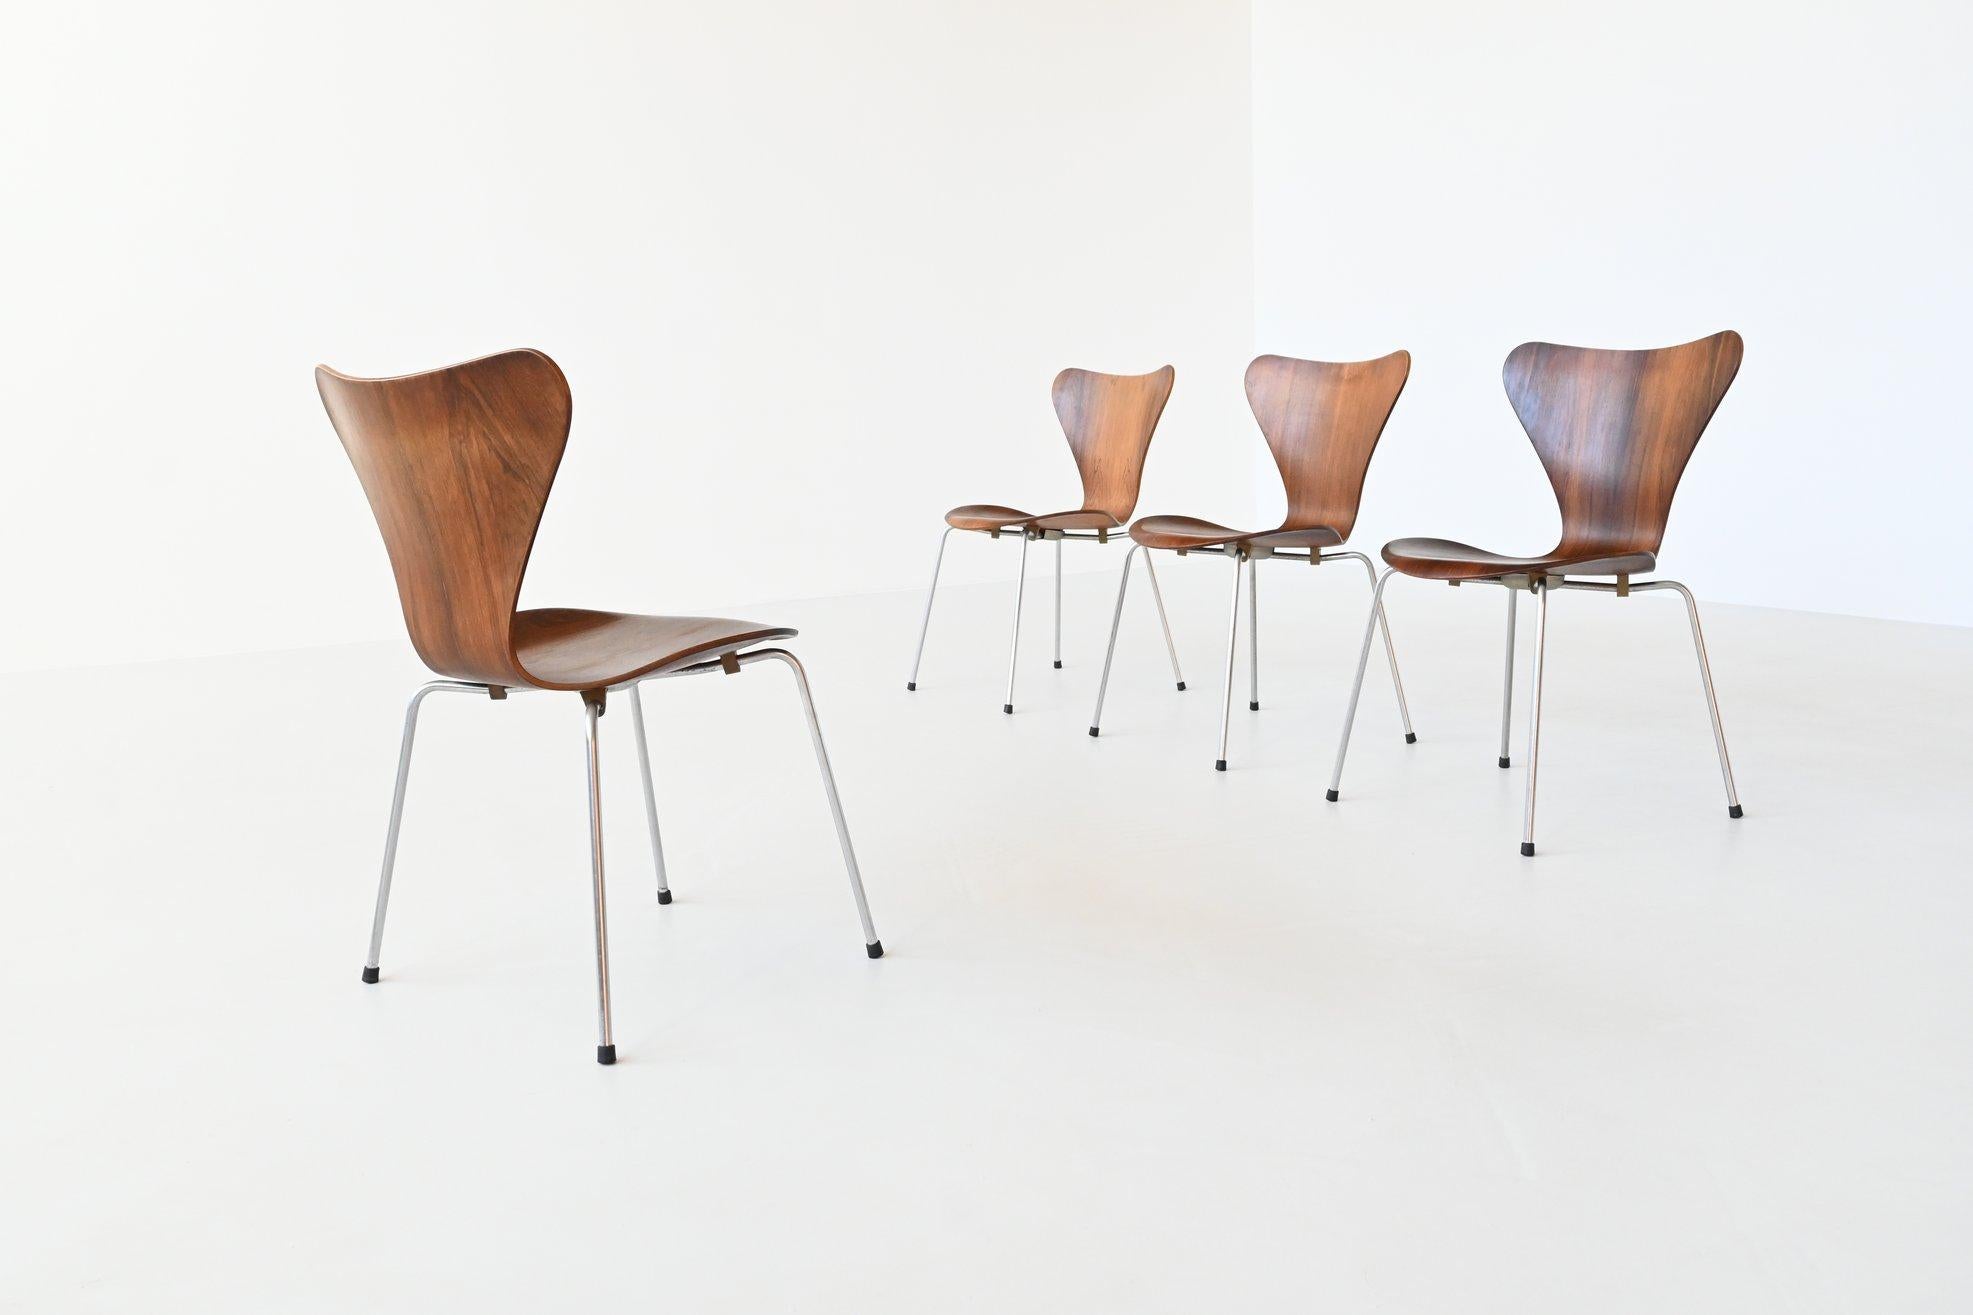 Iconic and beautiful shaped model 3107 “Butterfly” dining chairs designed by Arne Jacobsen and manufactured by Fritz Hansen, Denmark 1965. These well-crafted chairs are made of moulded plywood and finished with nicely grained rosewood veneer. They